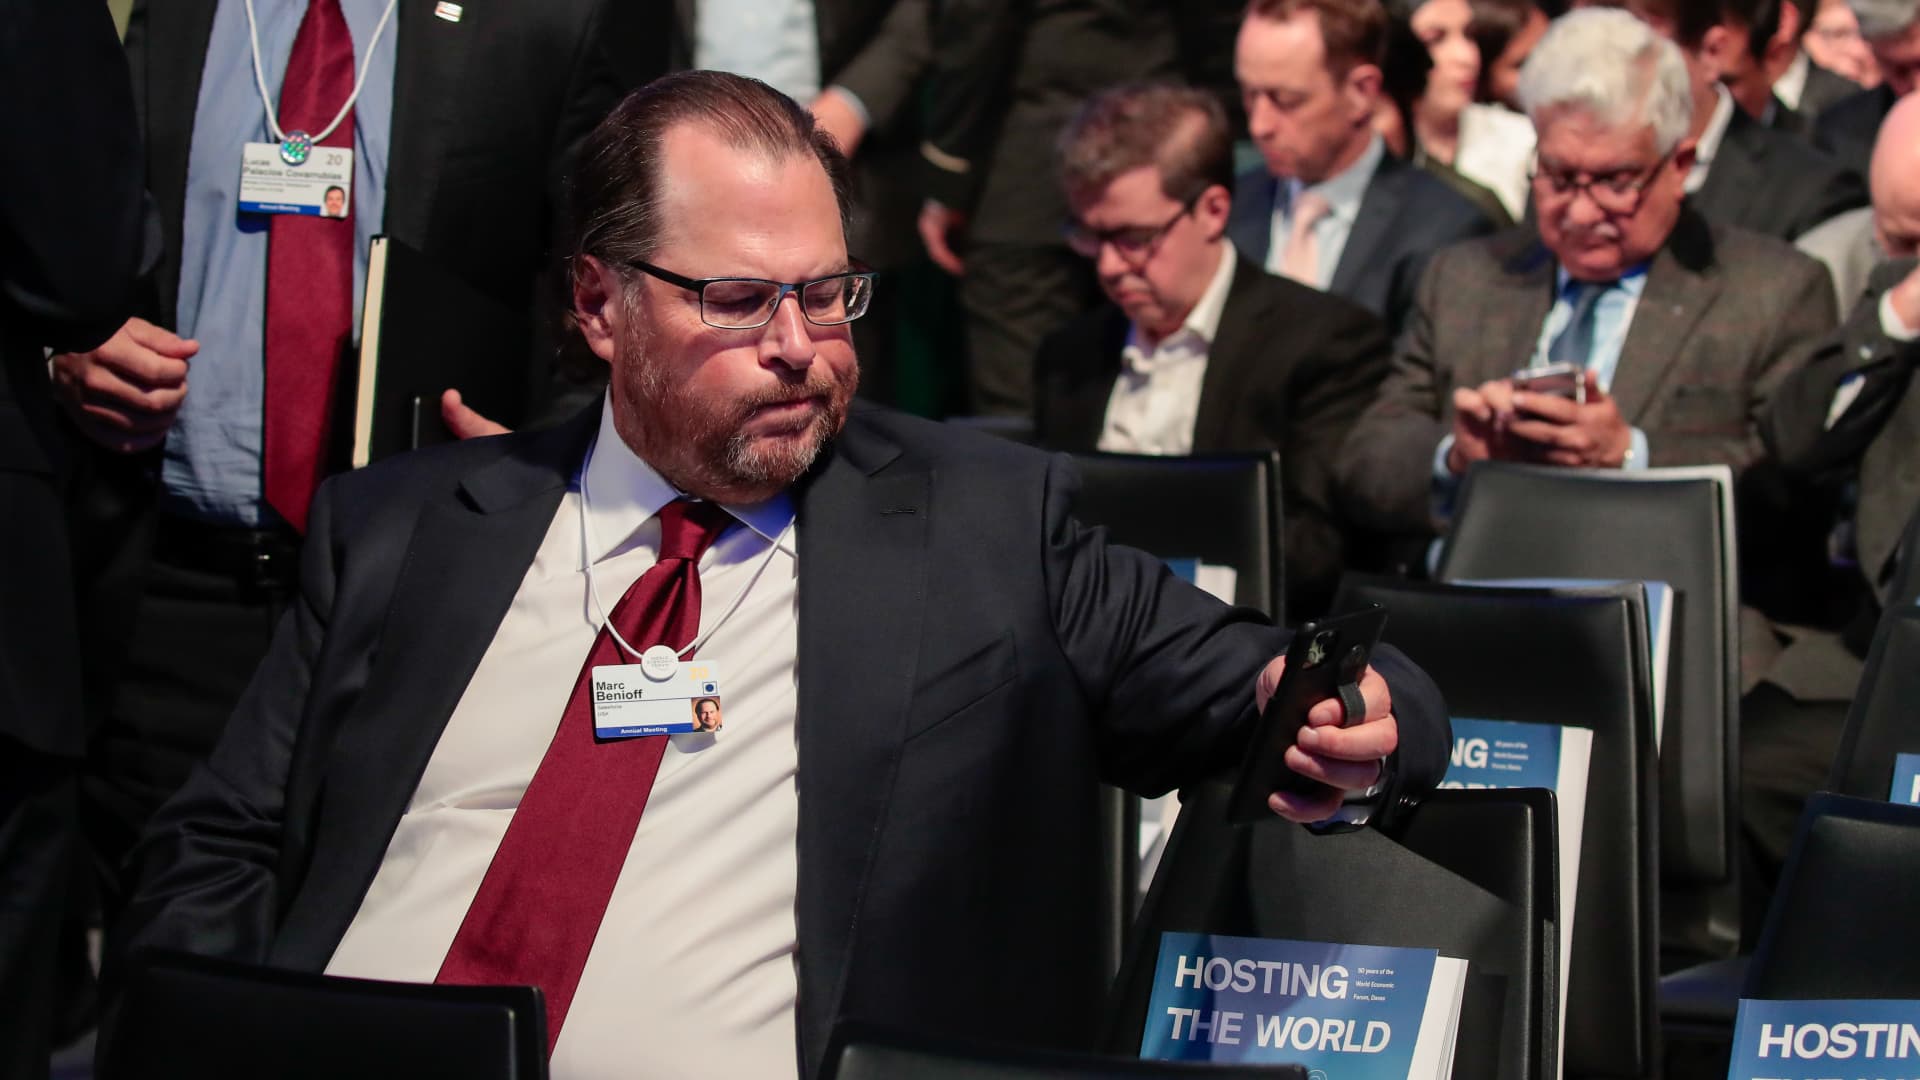 Marc Benioff, co-founder and CEO of Salesforce, sits in the audience ahead of the special address by U.S. President Donald Trump on the opening day of the World Economic Forum in Davos, Switzerland, on Jan. 21, 2020.